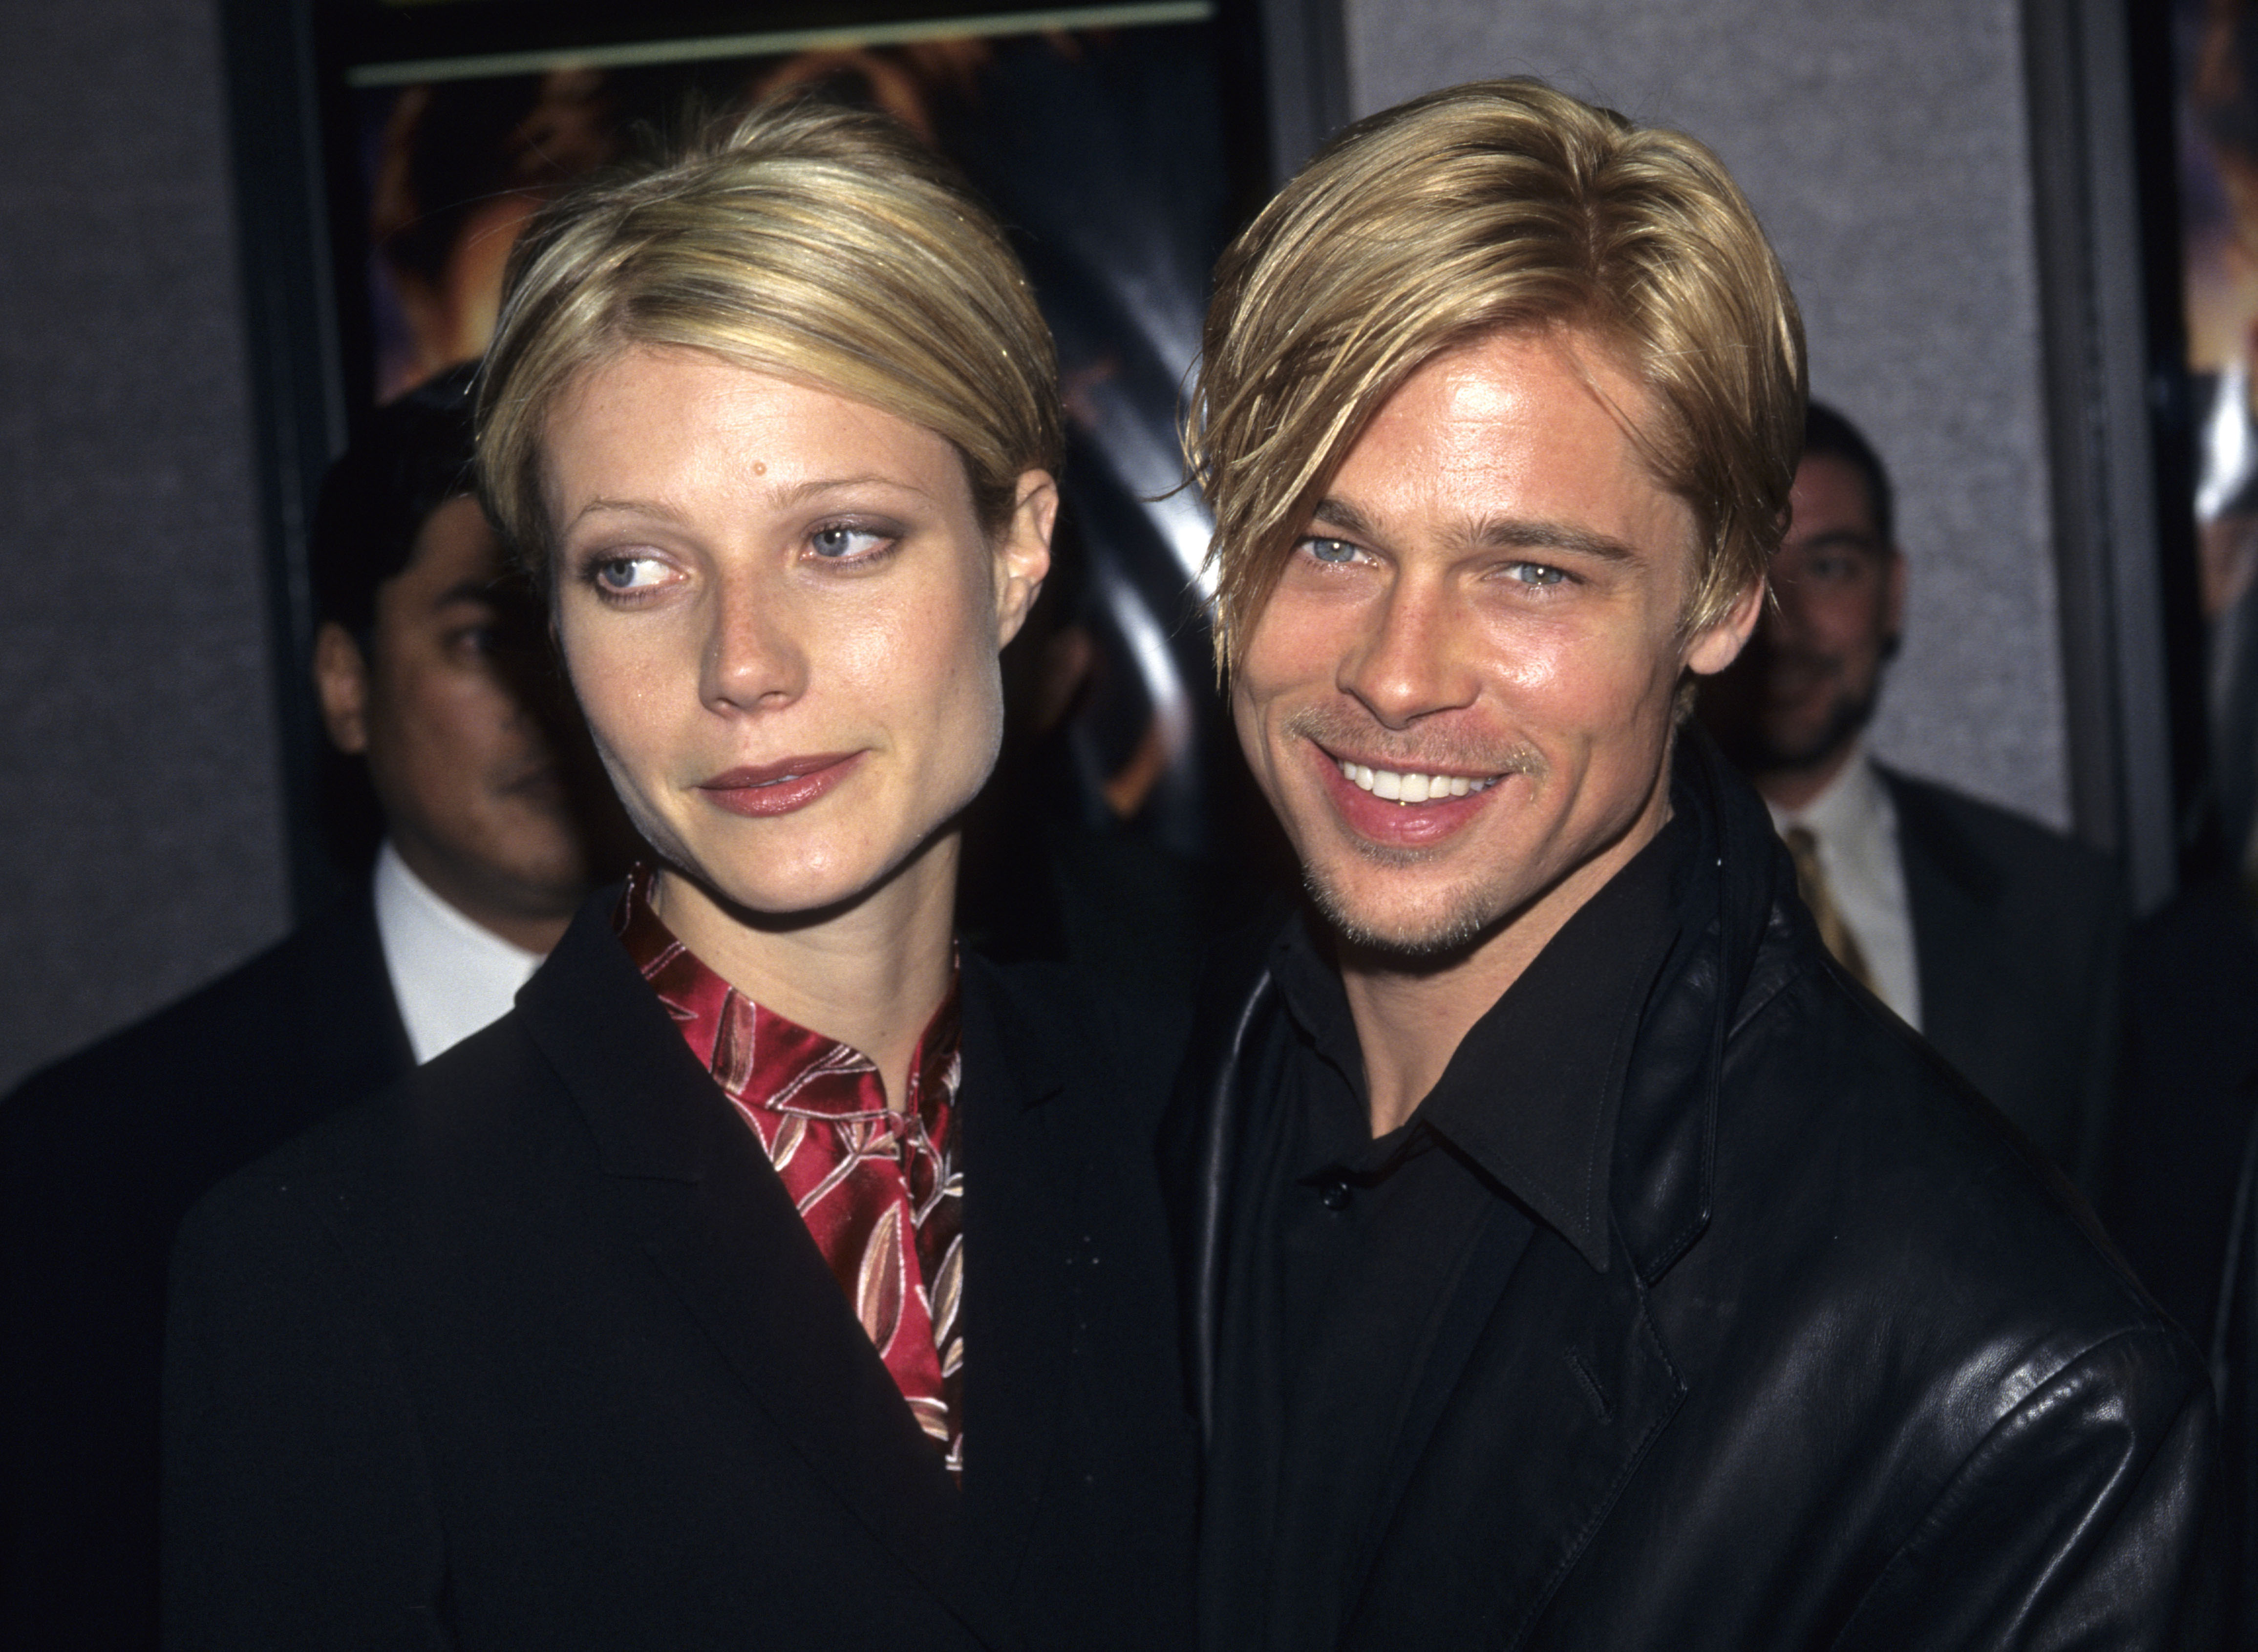 Gwyneth Paltrow and Brad Pitt at the "The Devil's Own" premiere on March 13, 1997 | Source: Getty Images